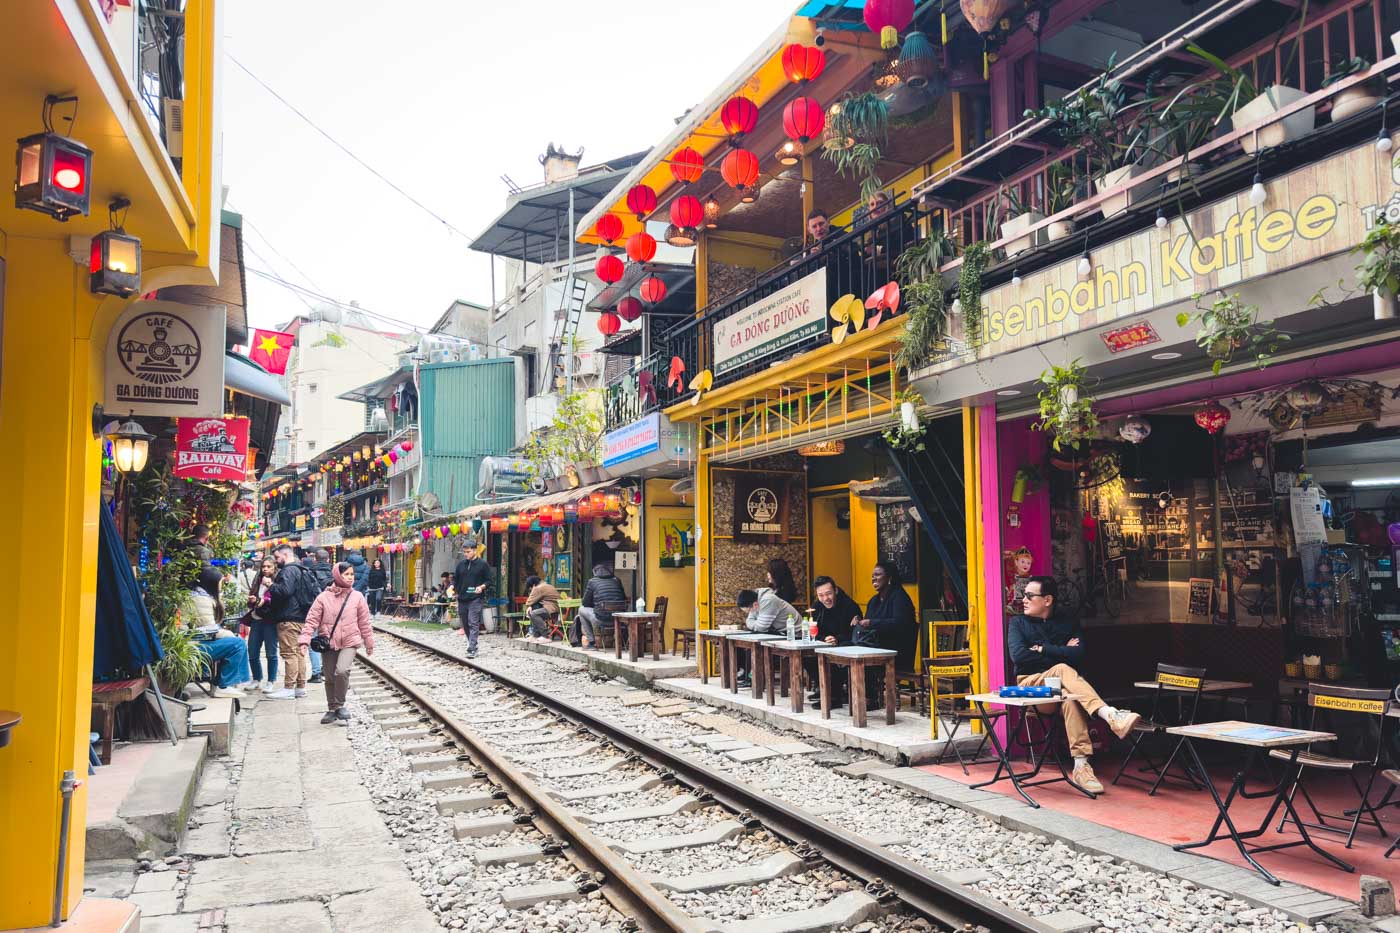 Cafes lining both sides of Hanoi Train Street while people sit inside drinking coffee and waiting for the train.